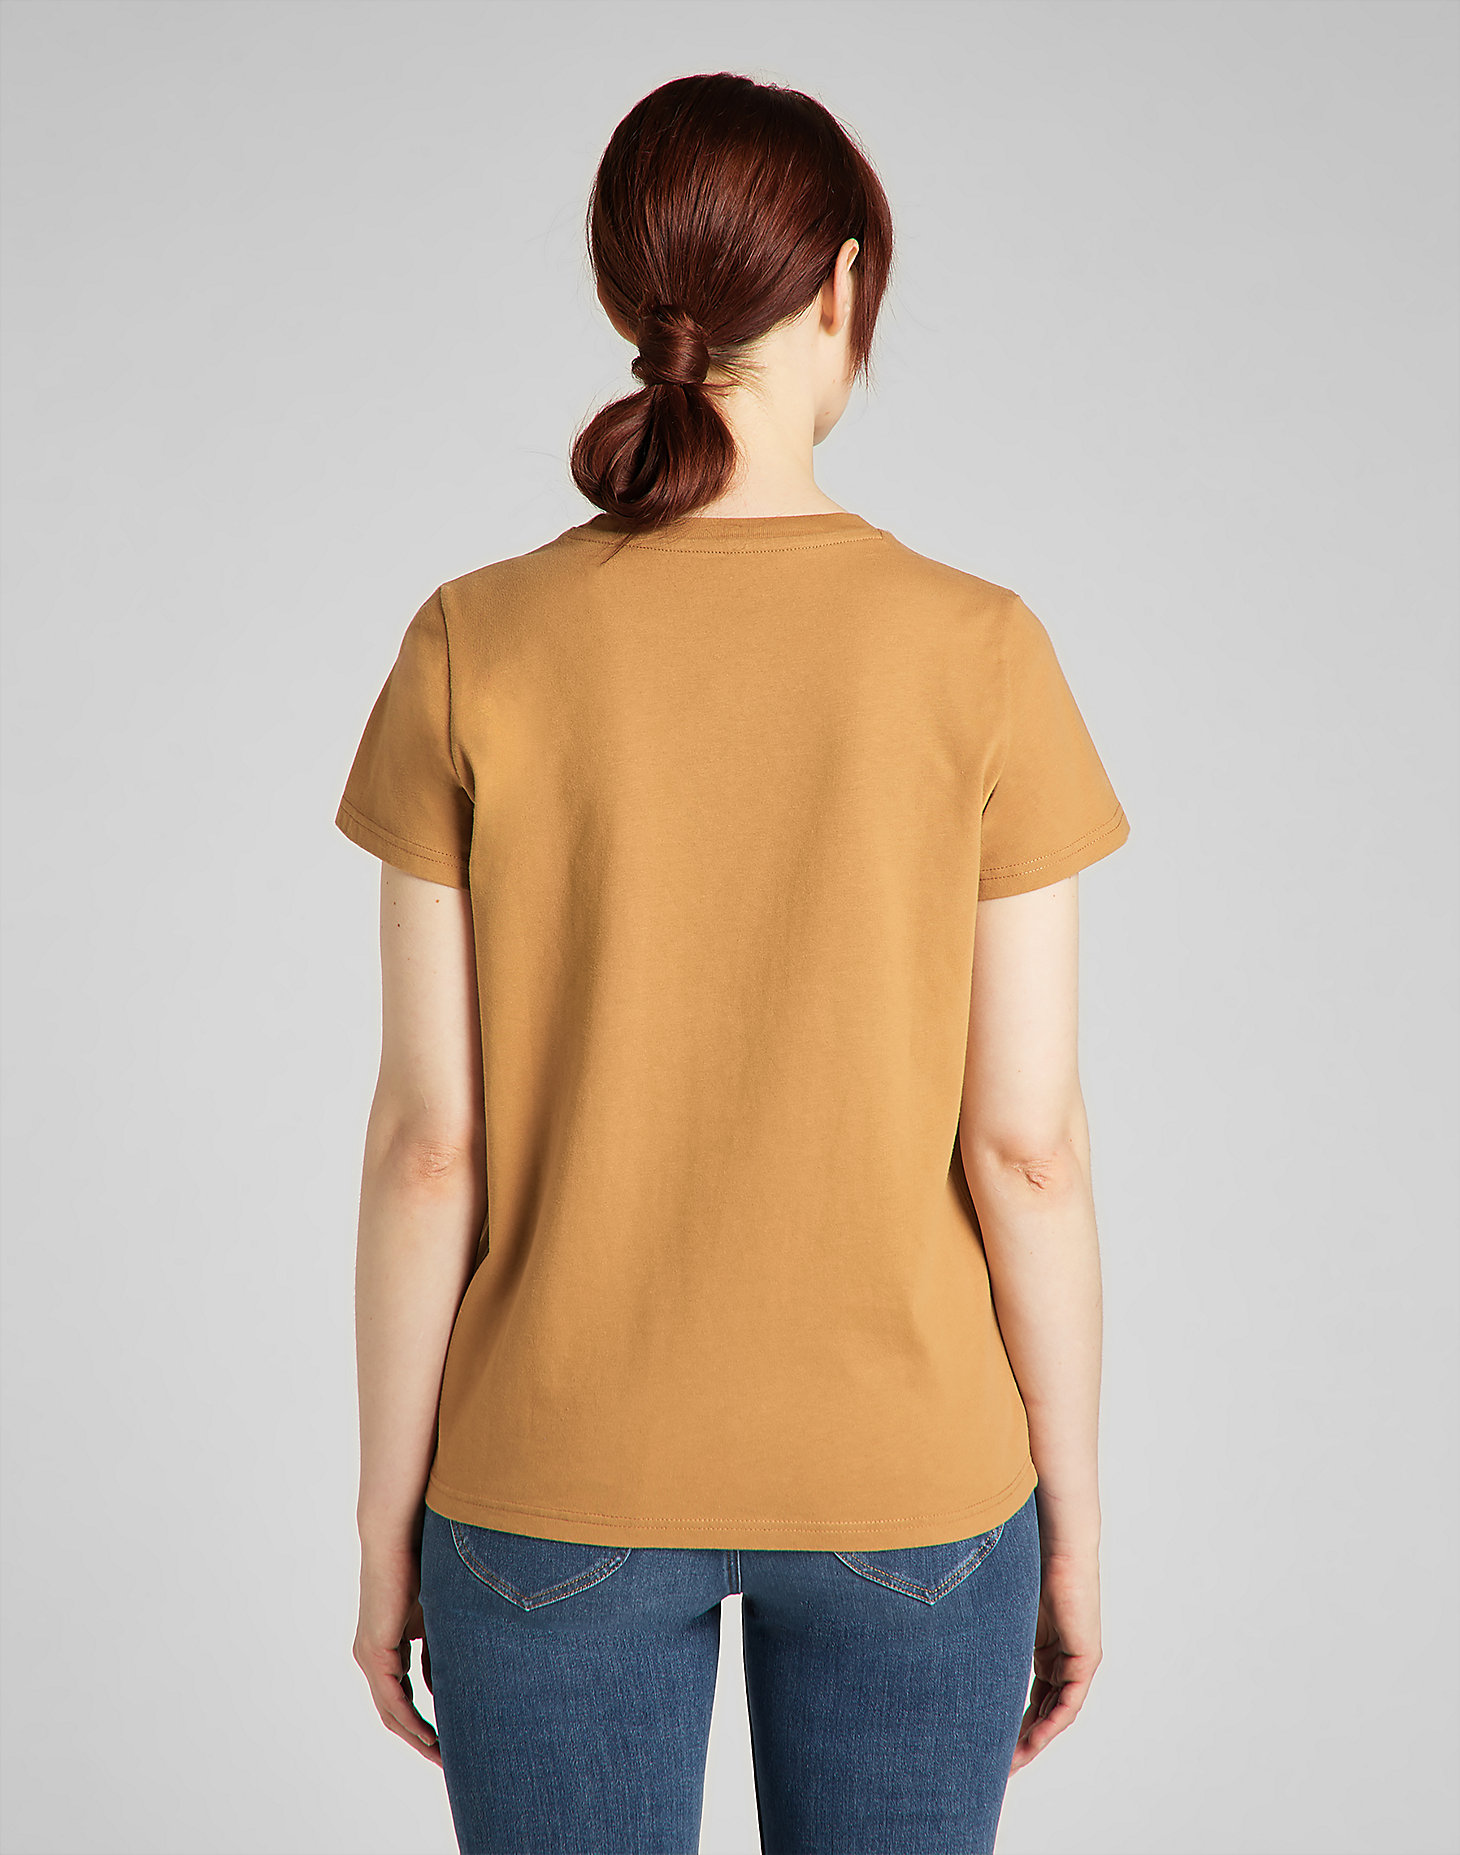 Easy Graphic Tee in Tobacco Brown alternative view 1